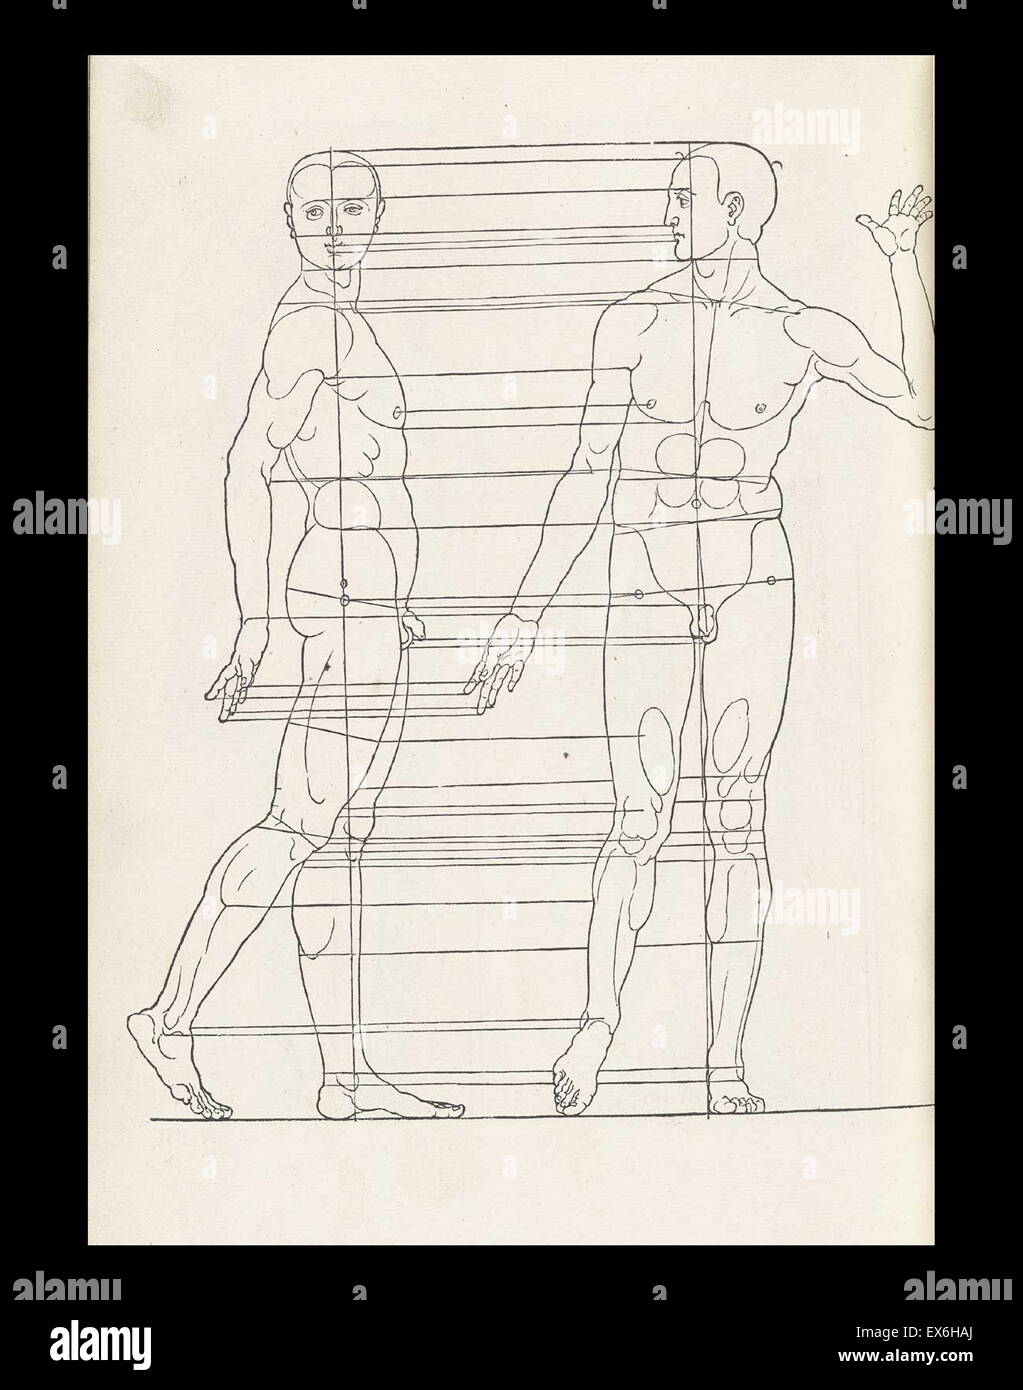 Anatomical illustration from 'Vier Bücher von menschlicher Proportion' ' by Albrecht Dürer (1471-1528), Nuremberg, 1528. His collection of drawings were used to apply the science of human anatomical proportions to aesthetics Stock Photo